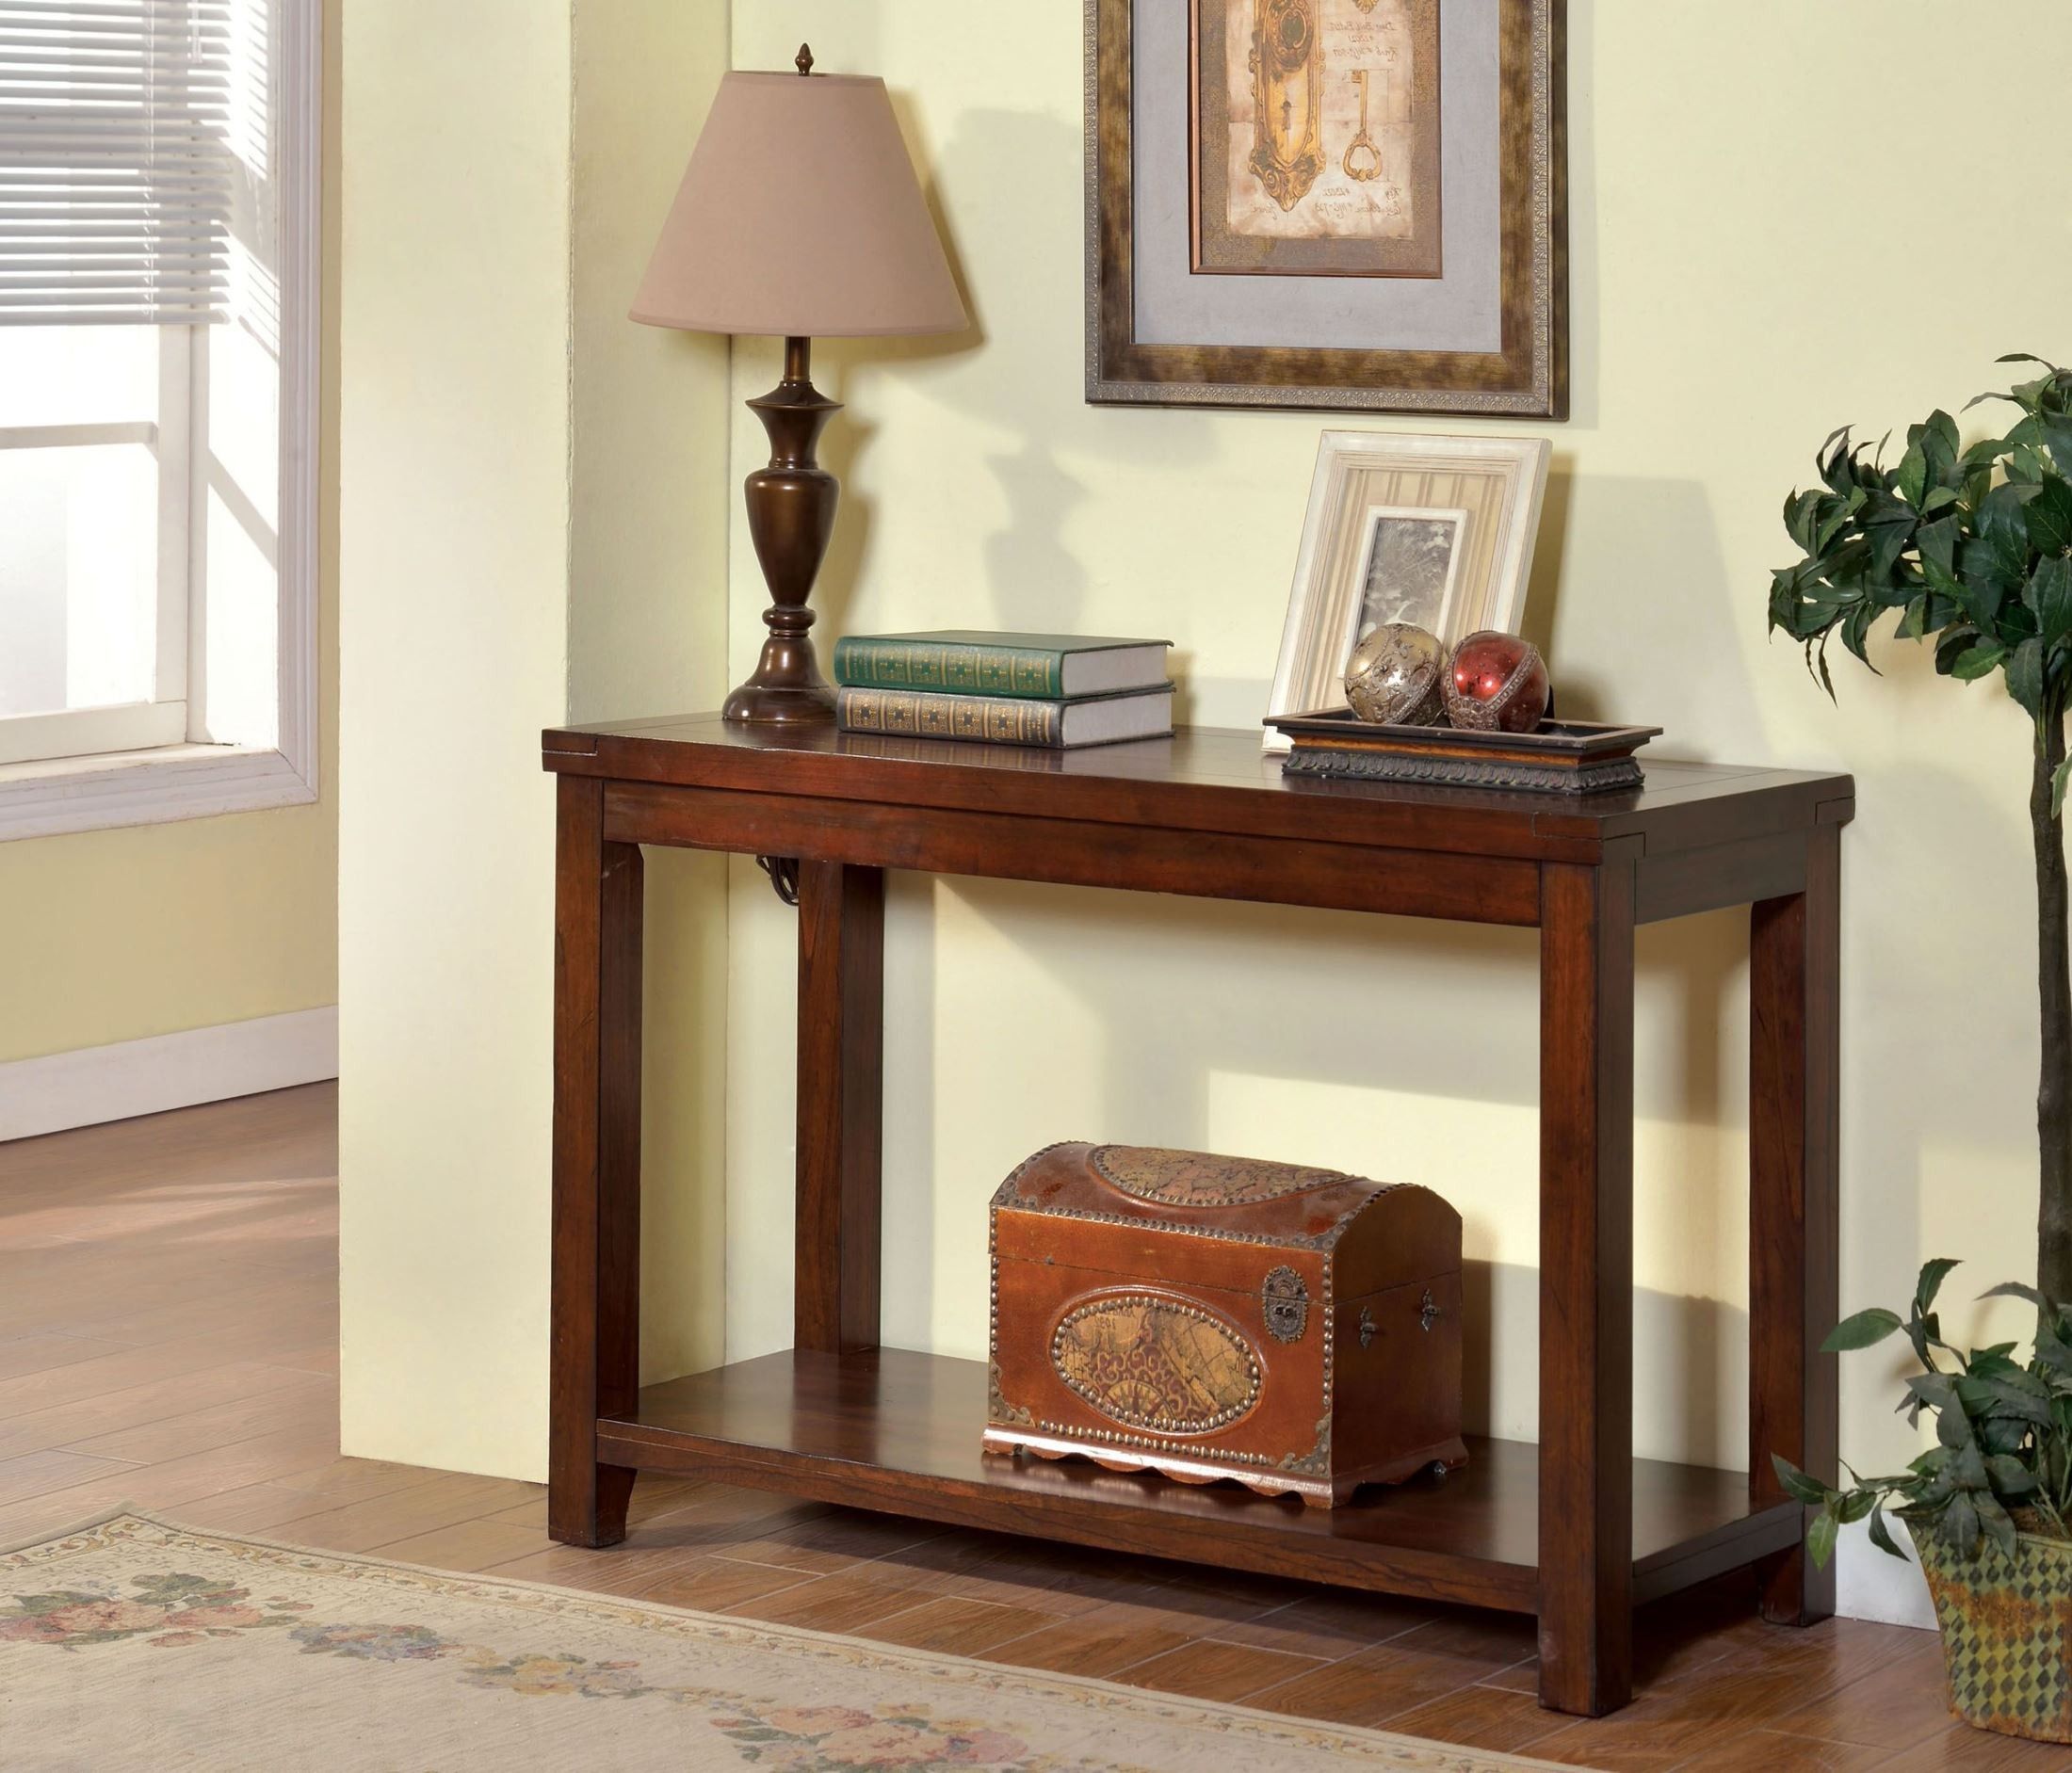 Estell Cherry Sofa Table From Furniture Of America Intended For Heartwood Cherry Wood Console Tables (View 5 of 20)